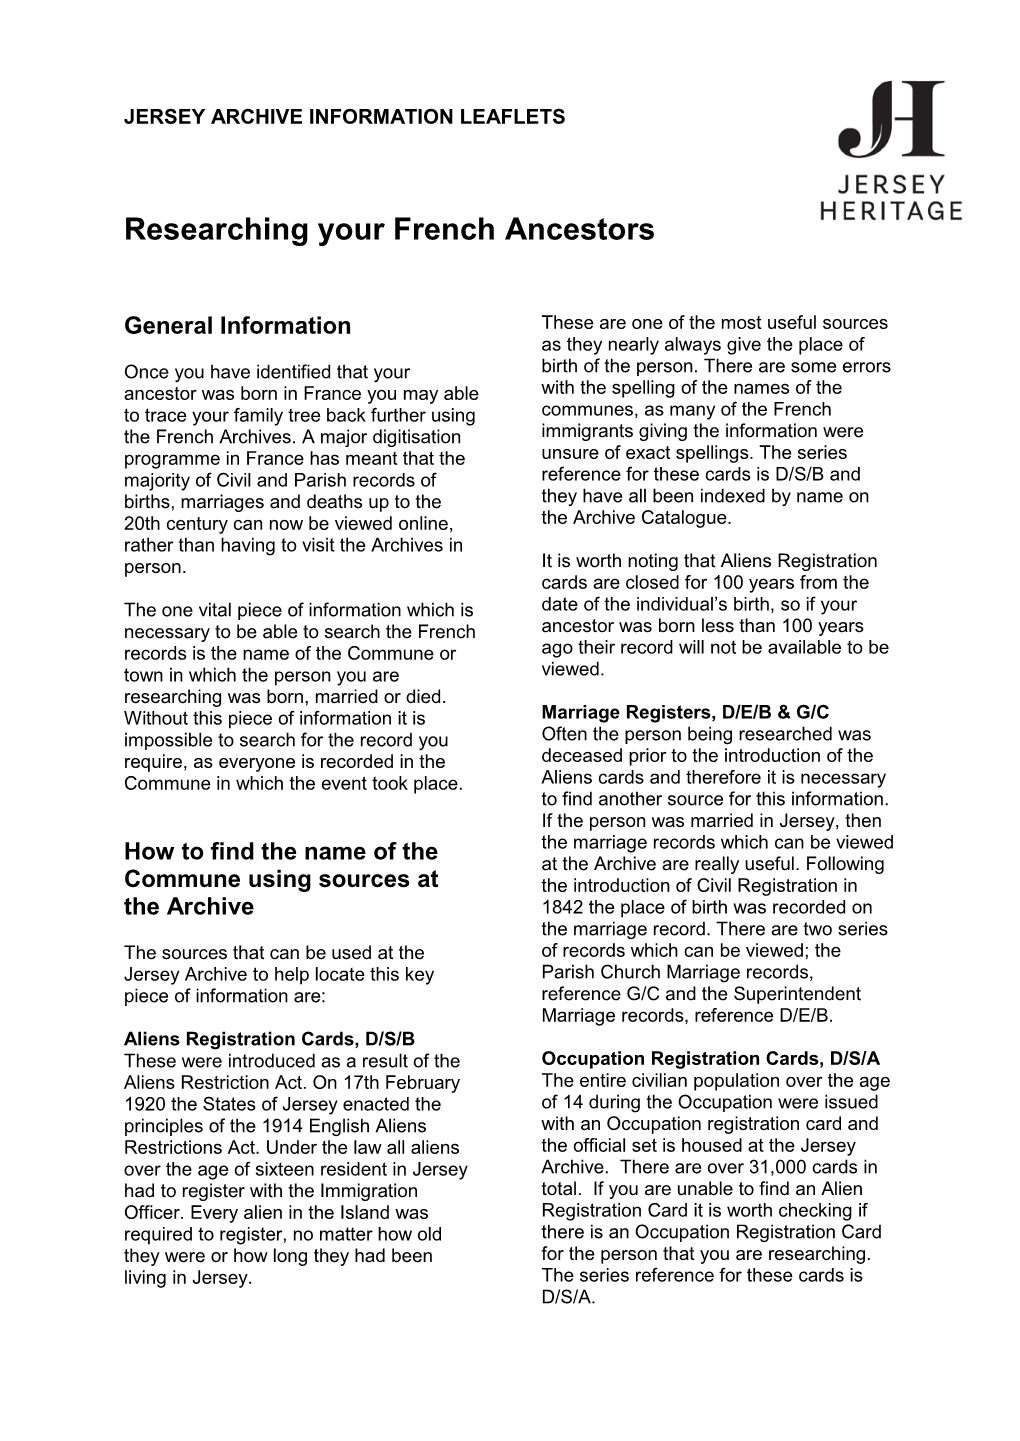 Researching Your French Ancestors